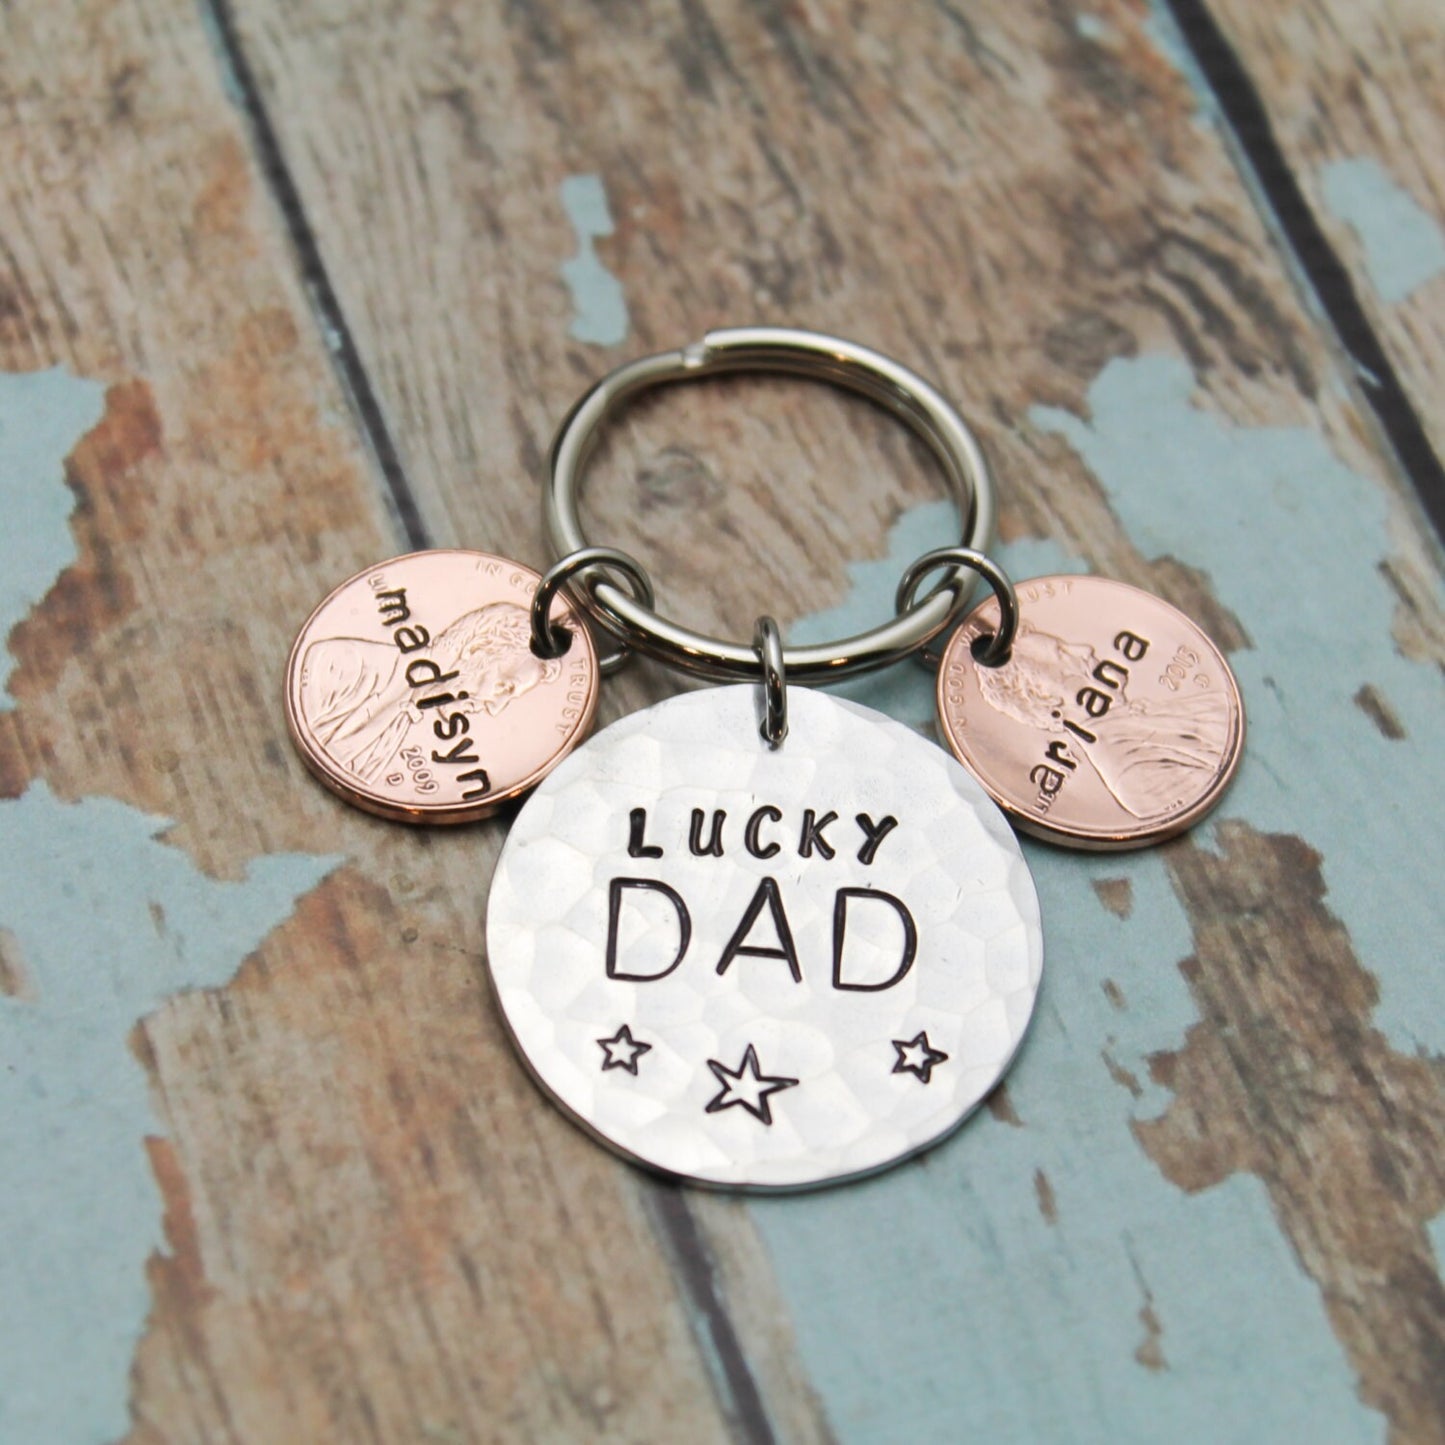 Daddy's Lucky Charms Keychain, Lucky Grandpa Keychain, Father's Day Gift, Gift for Him, Lucky Keychain, Grandfather Gift, Lucky Husband Gift